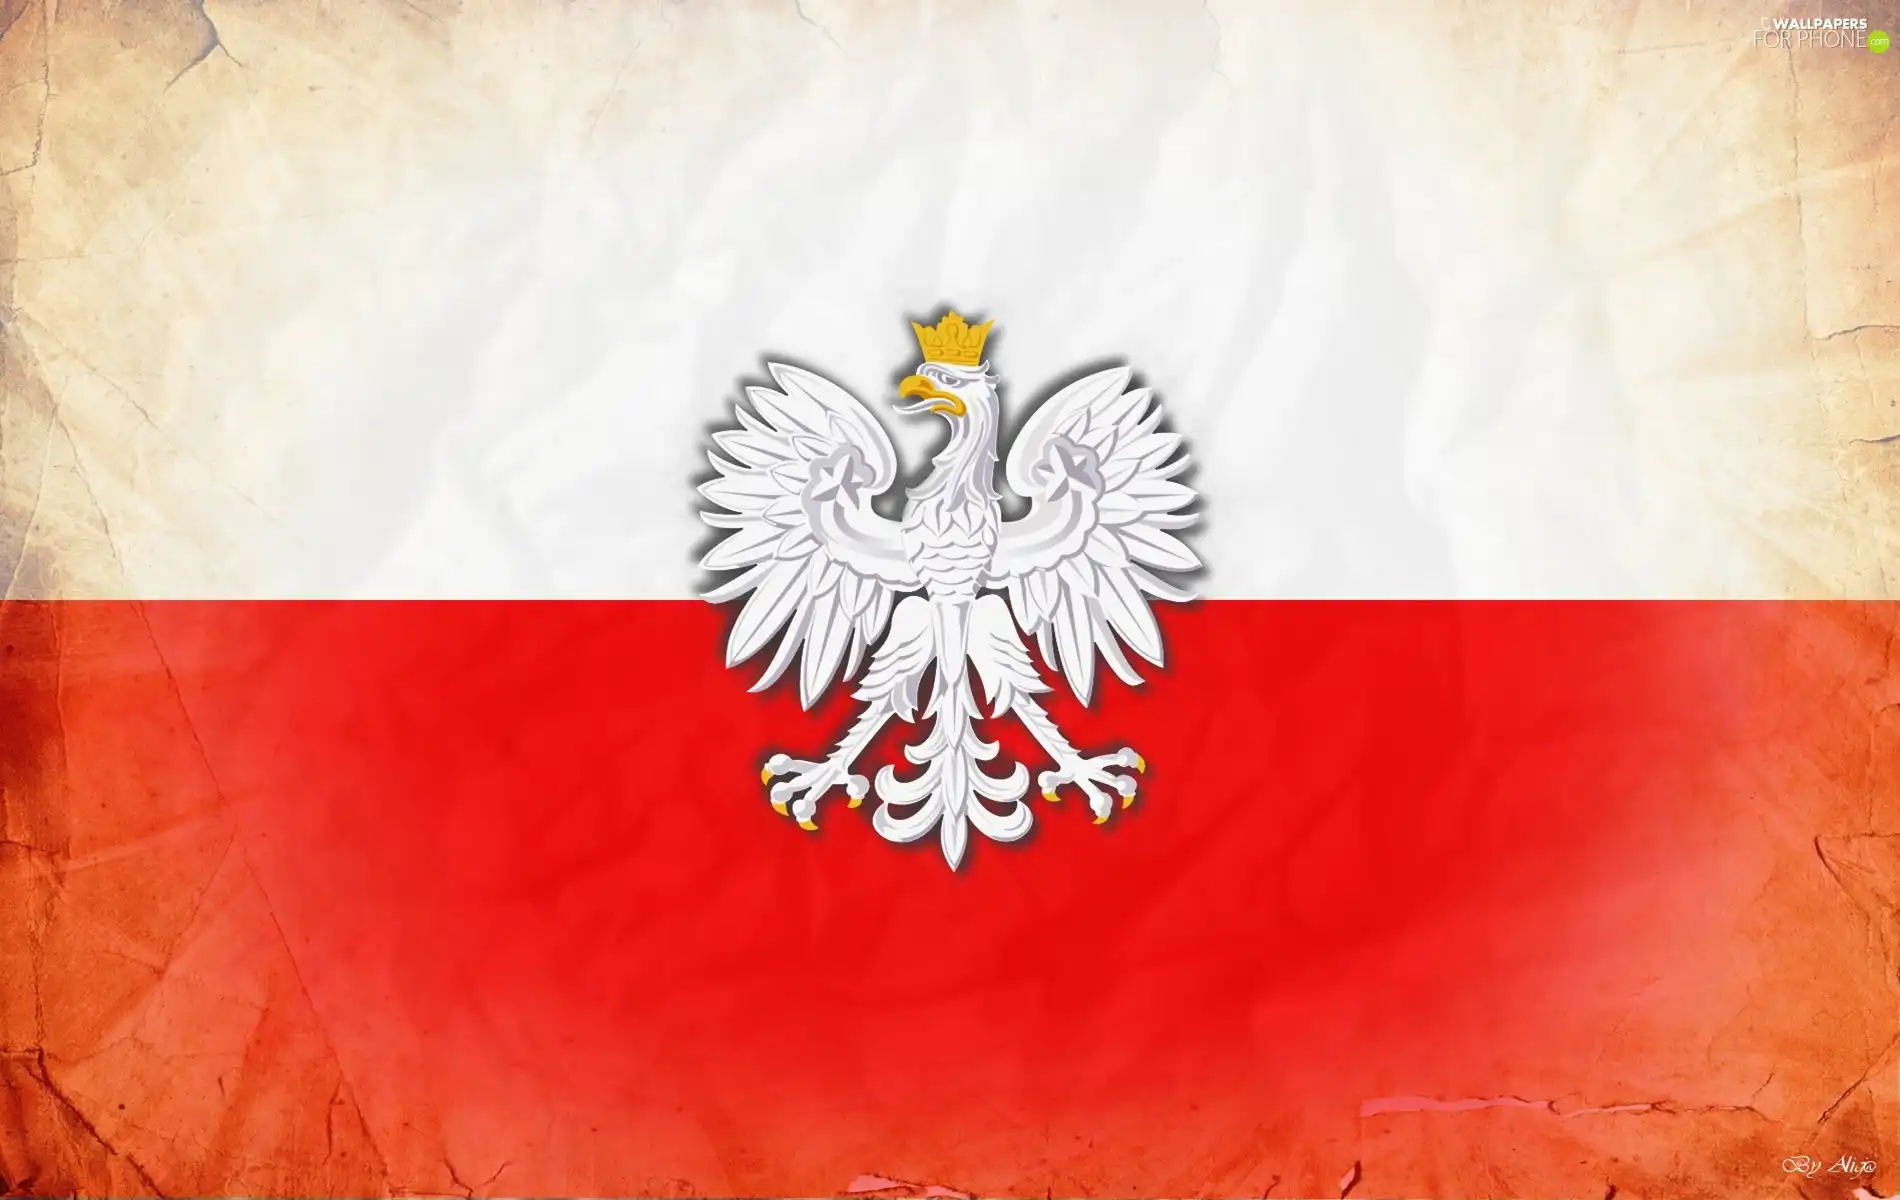 emblem, Poland, flag - For phone wallpapers: 1900x1200